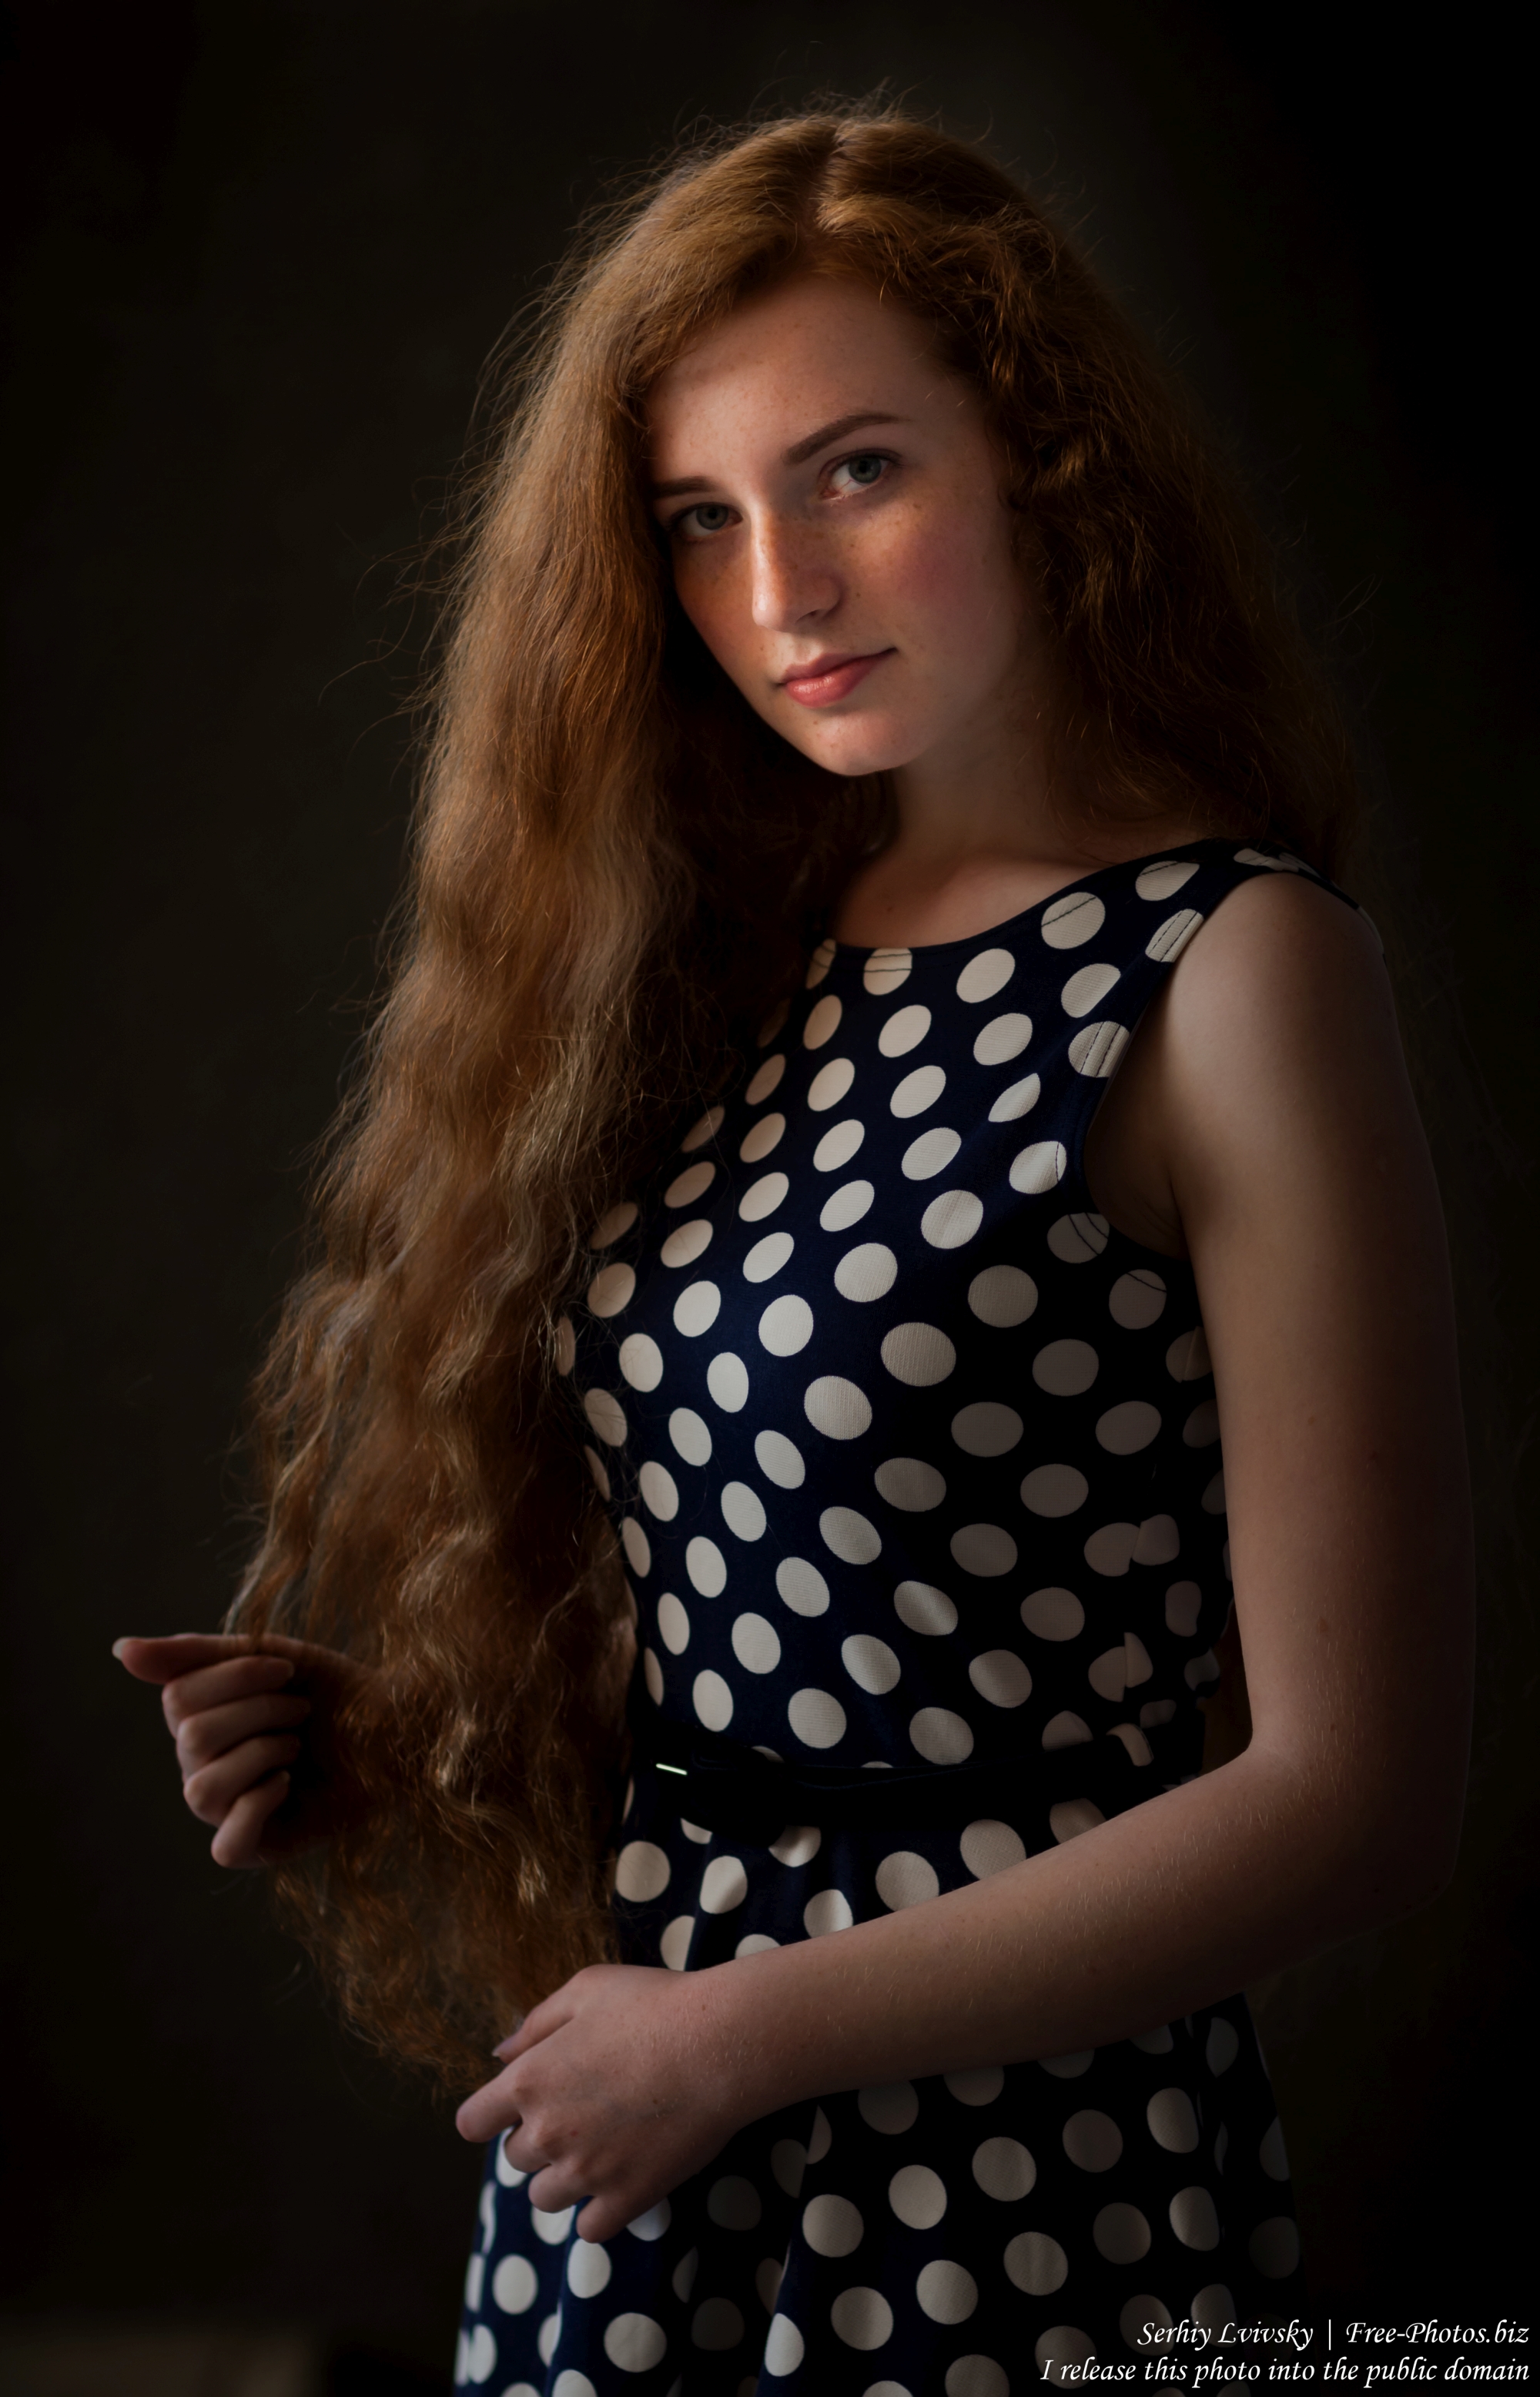 ania_a_19-year-old_natural_red-haired_girl_photographed_in_june_2017_by_serhiy_lvivsky_17